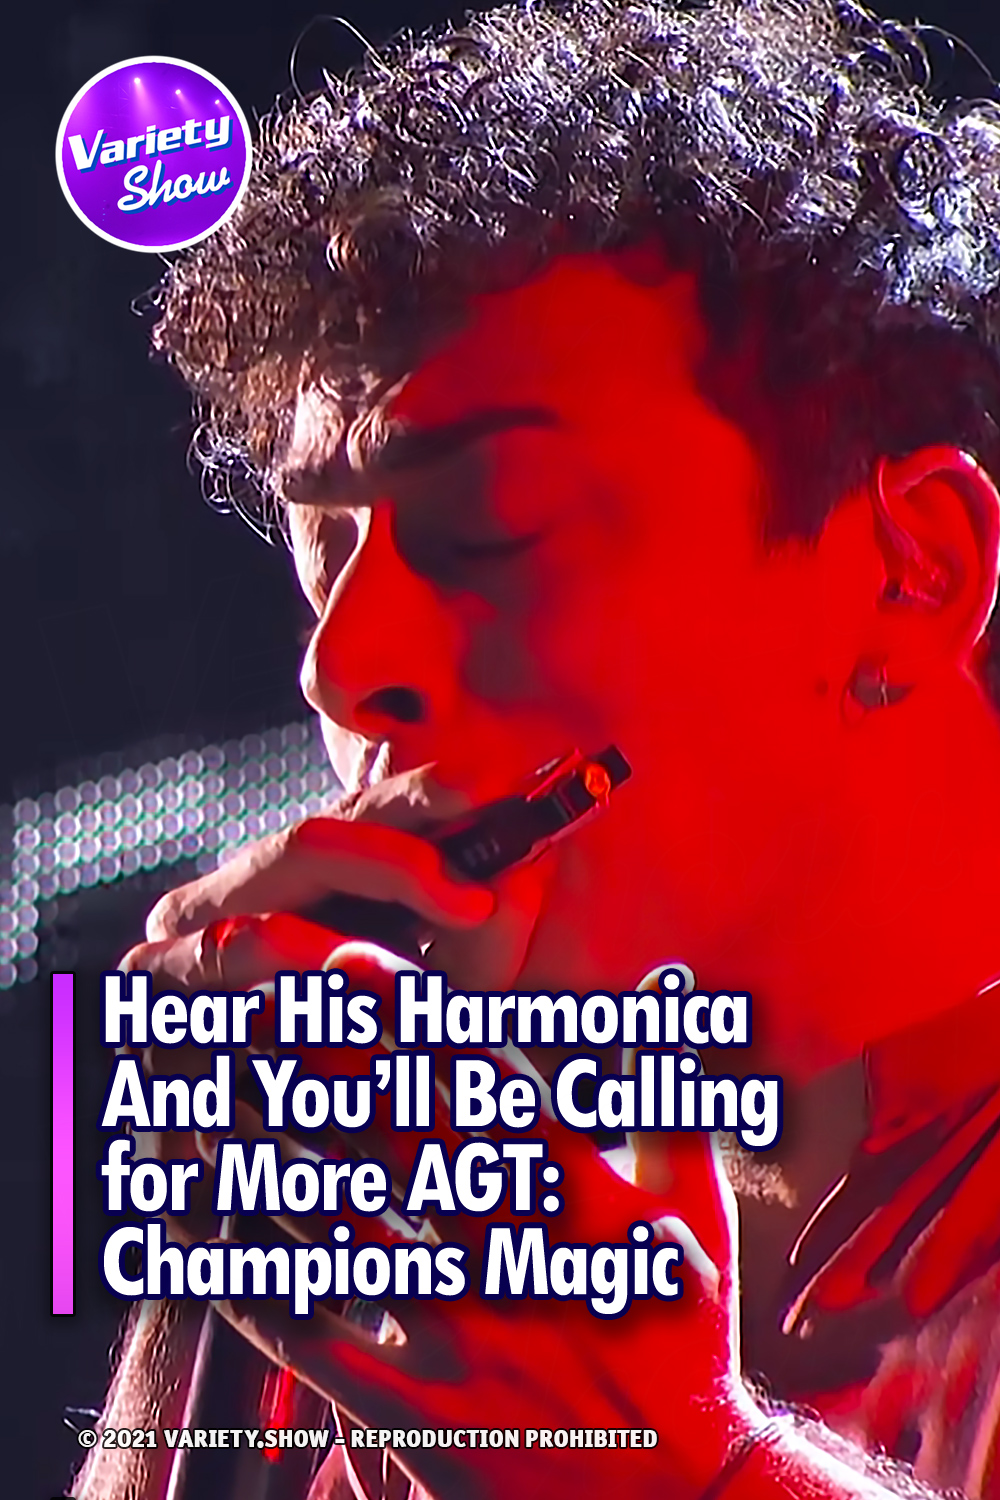 Hear His Harmonica And You’ll Be Calling for More AGT: Champions Magic